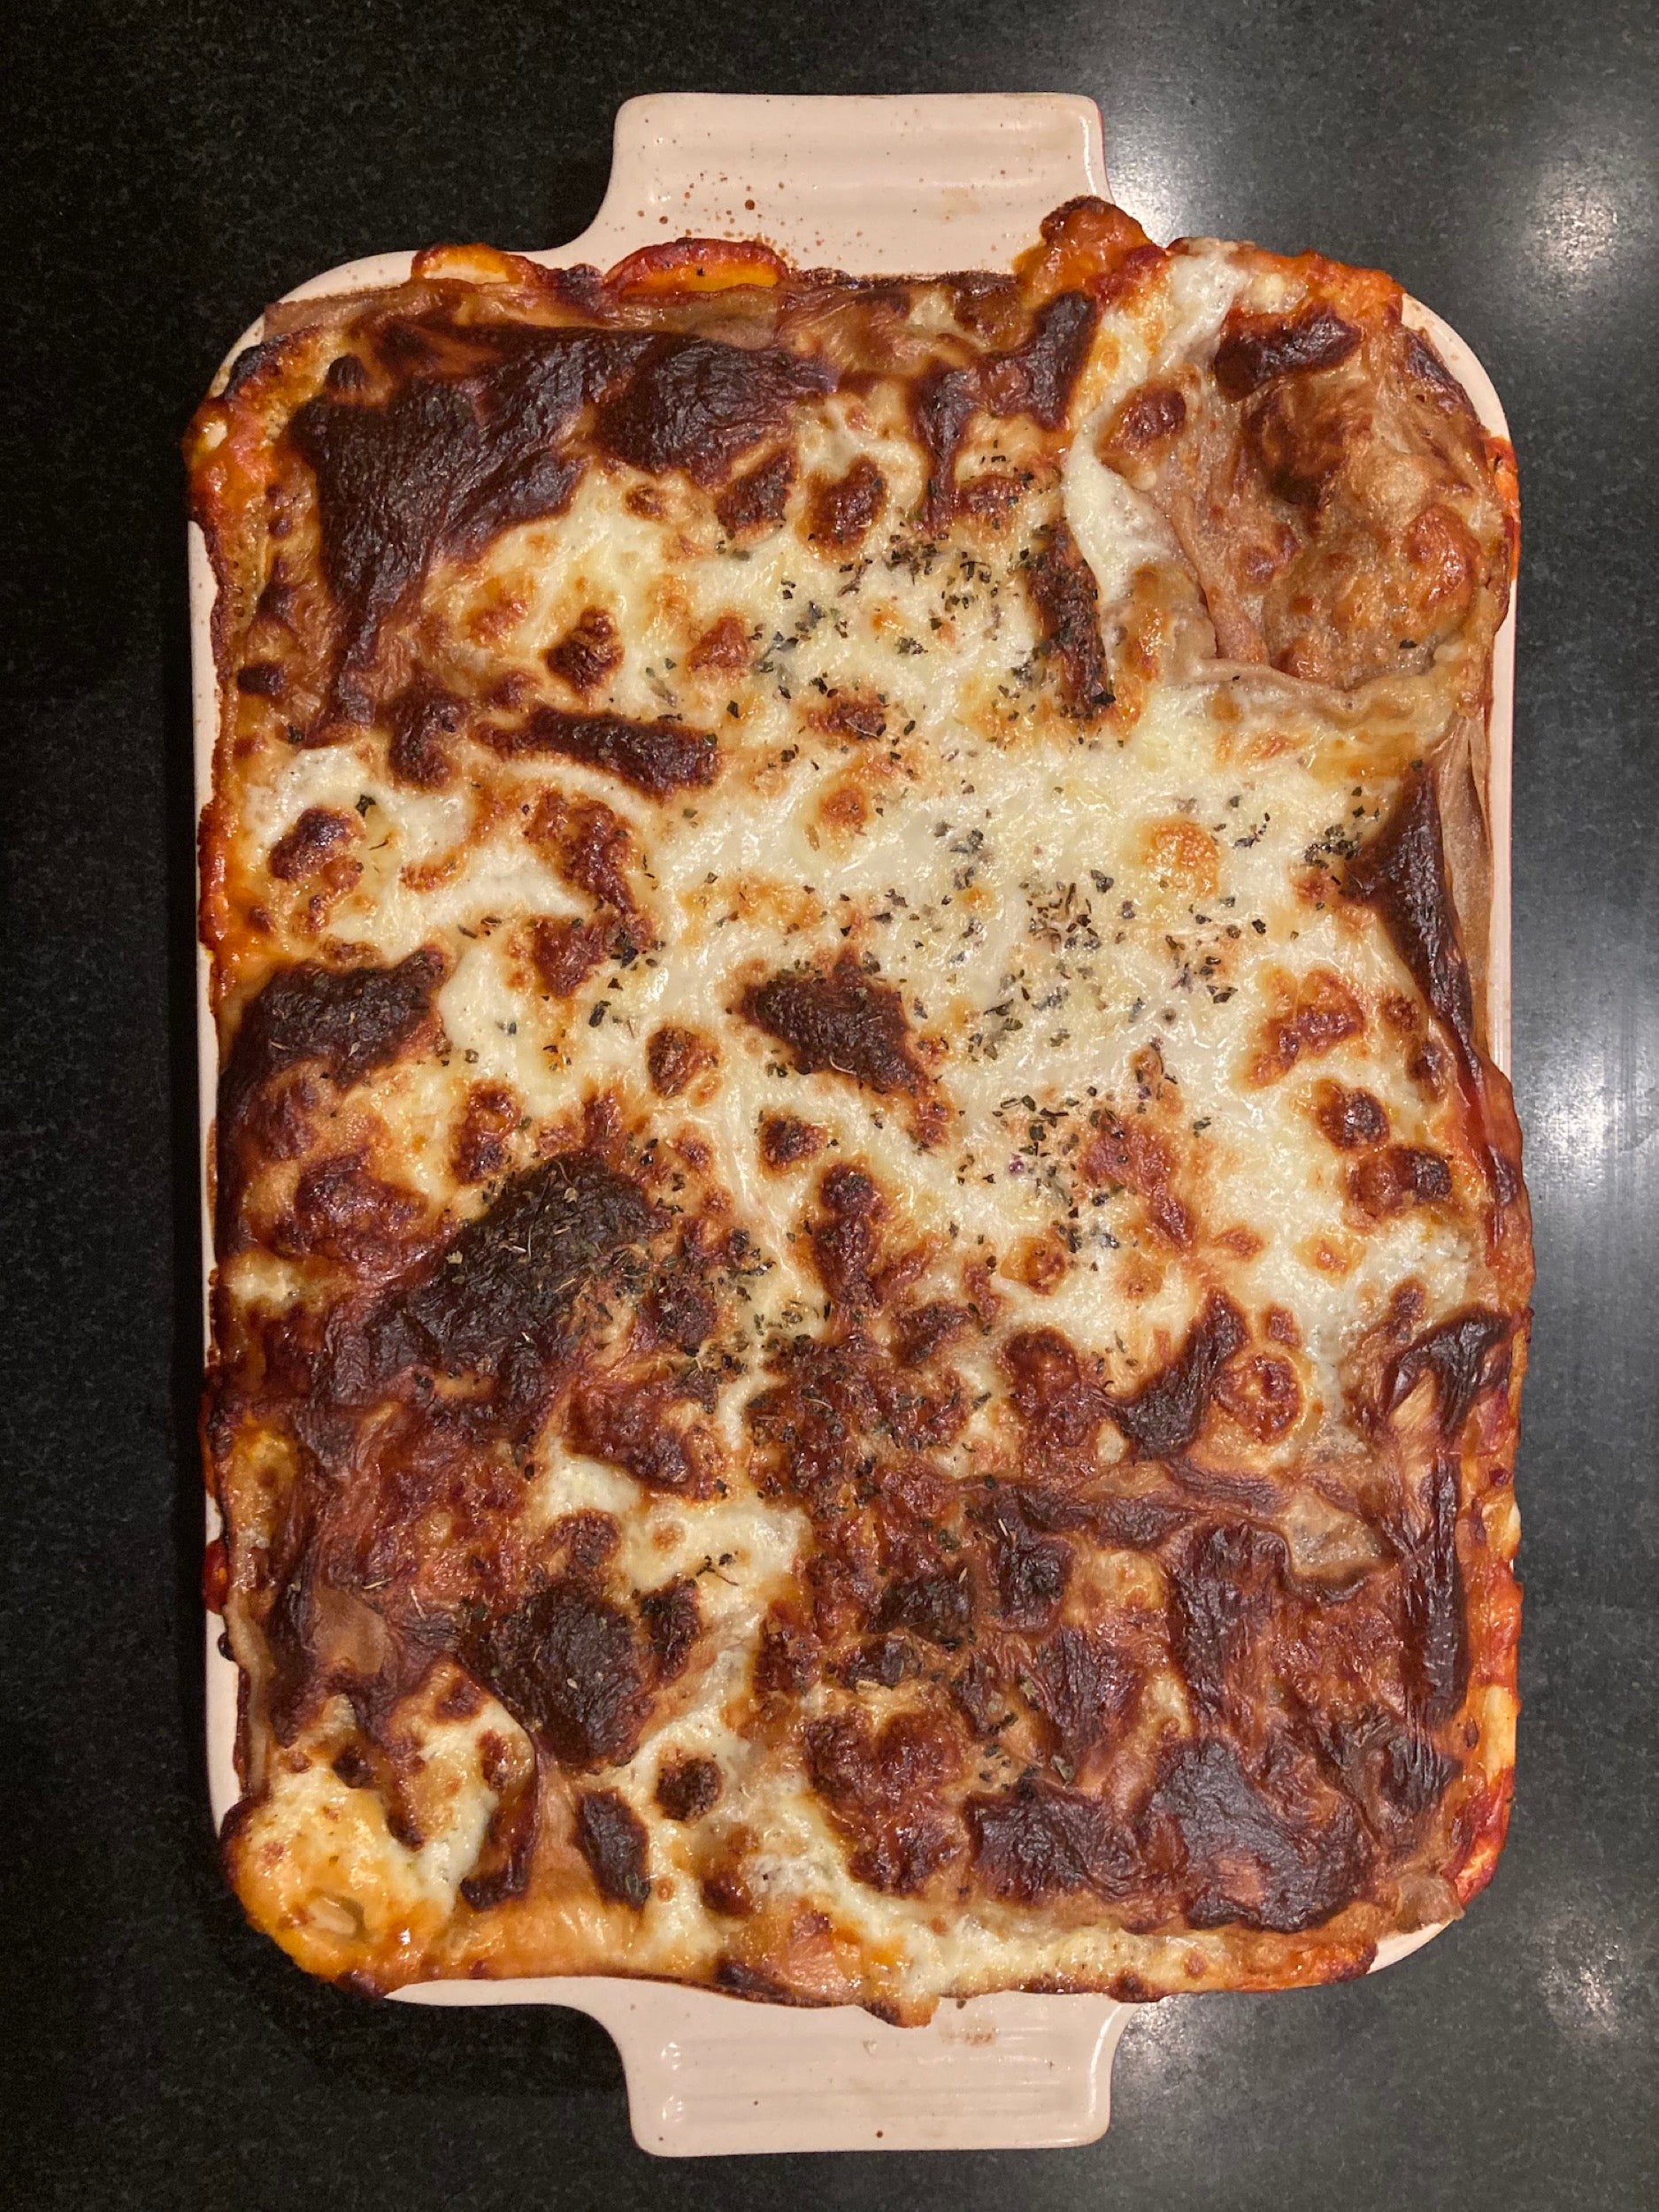 Lasagne with homemade pasta sheets and spent grain flour